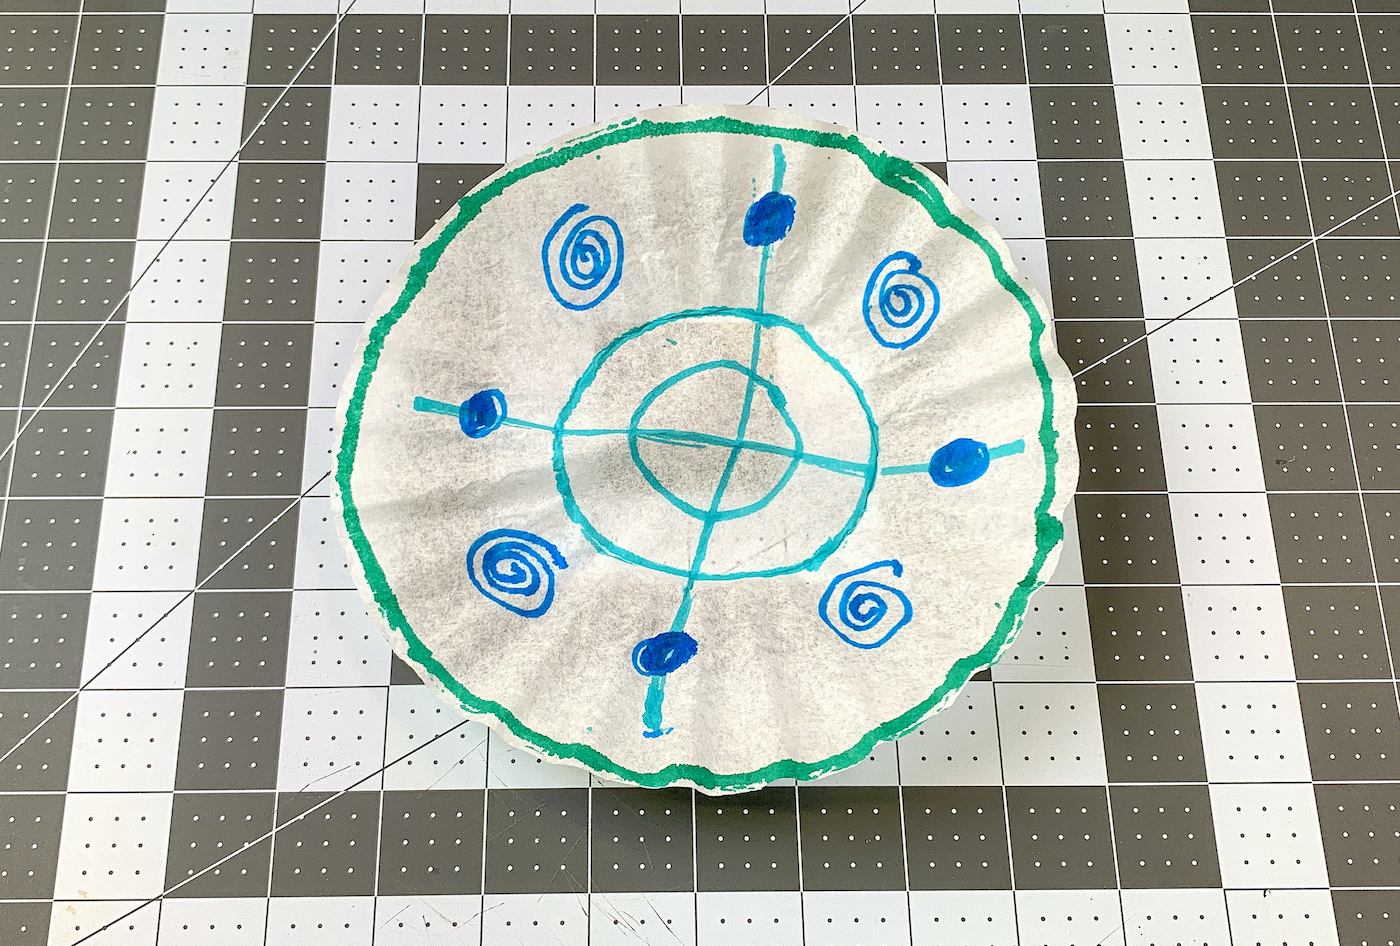 Coffee filter with marker lines drawn on it in green, blue, and aqua marker